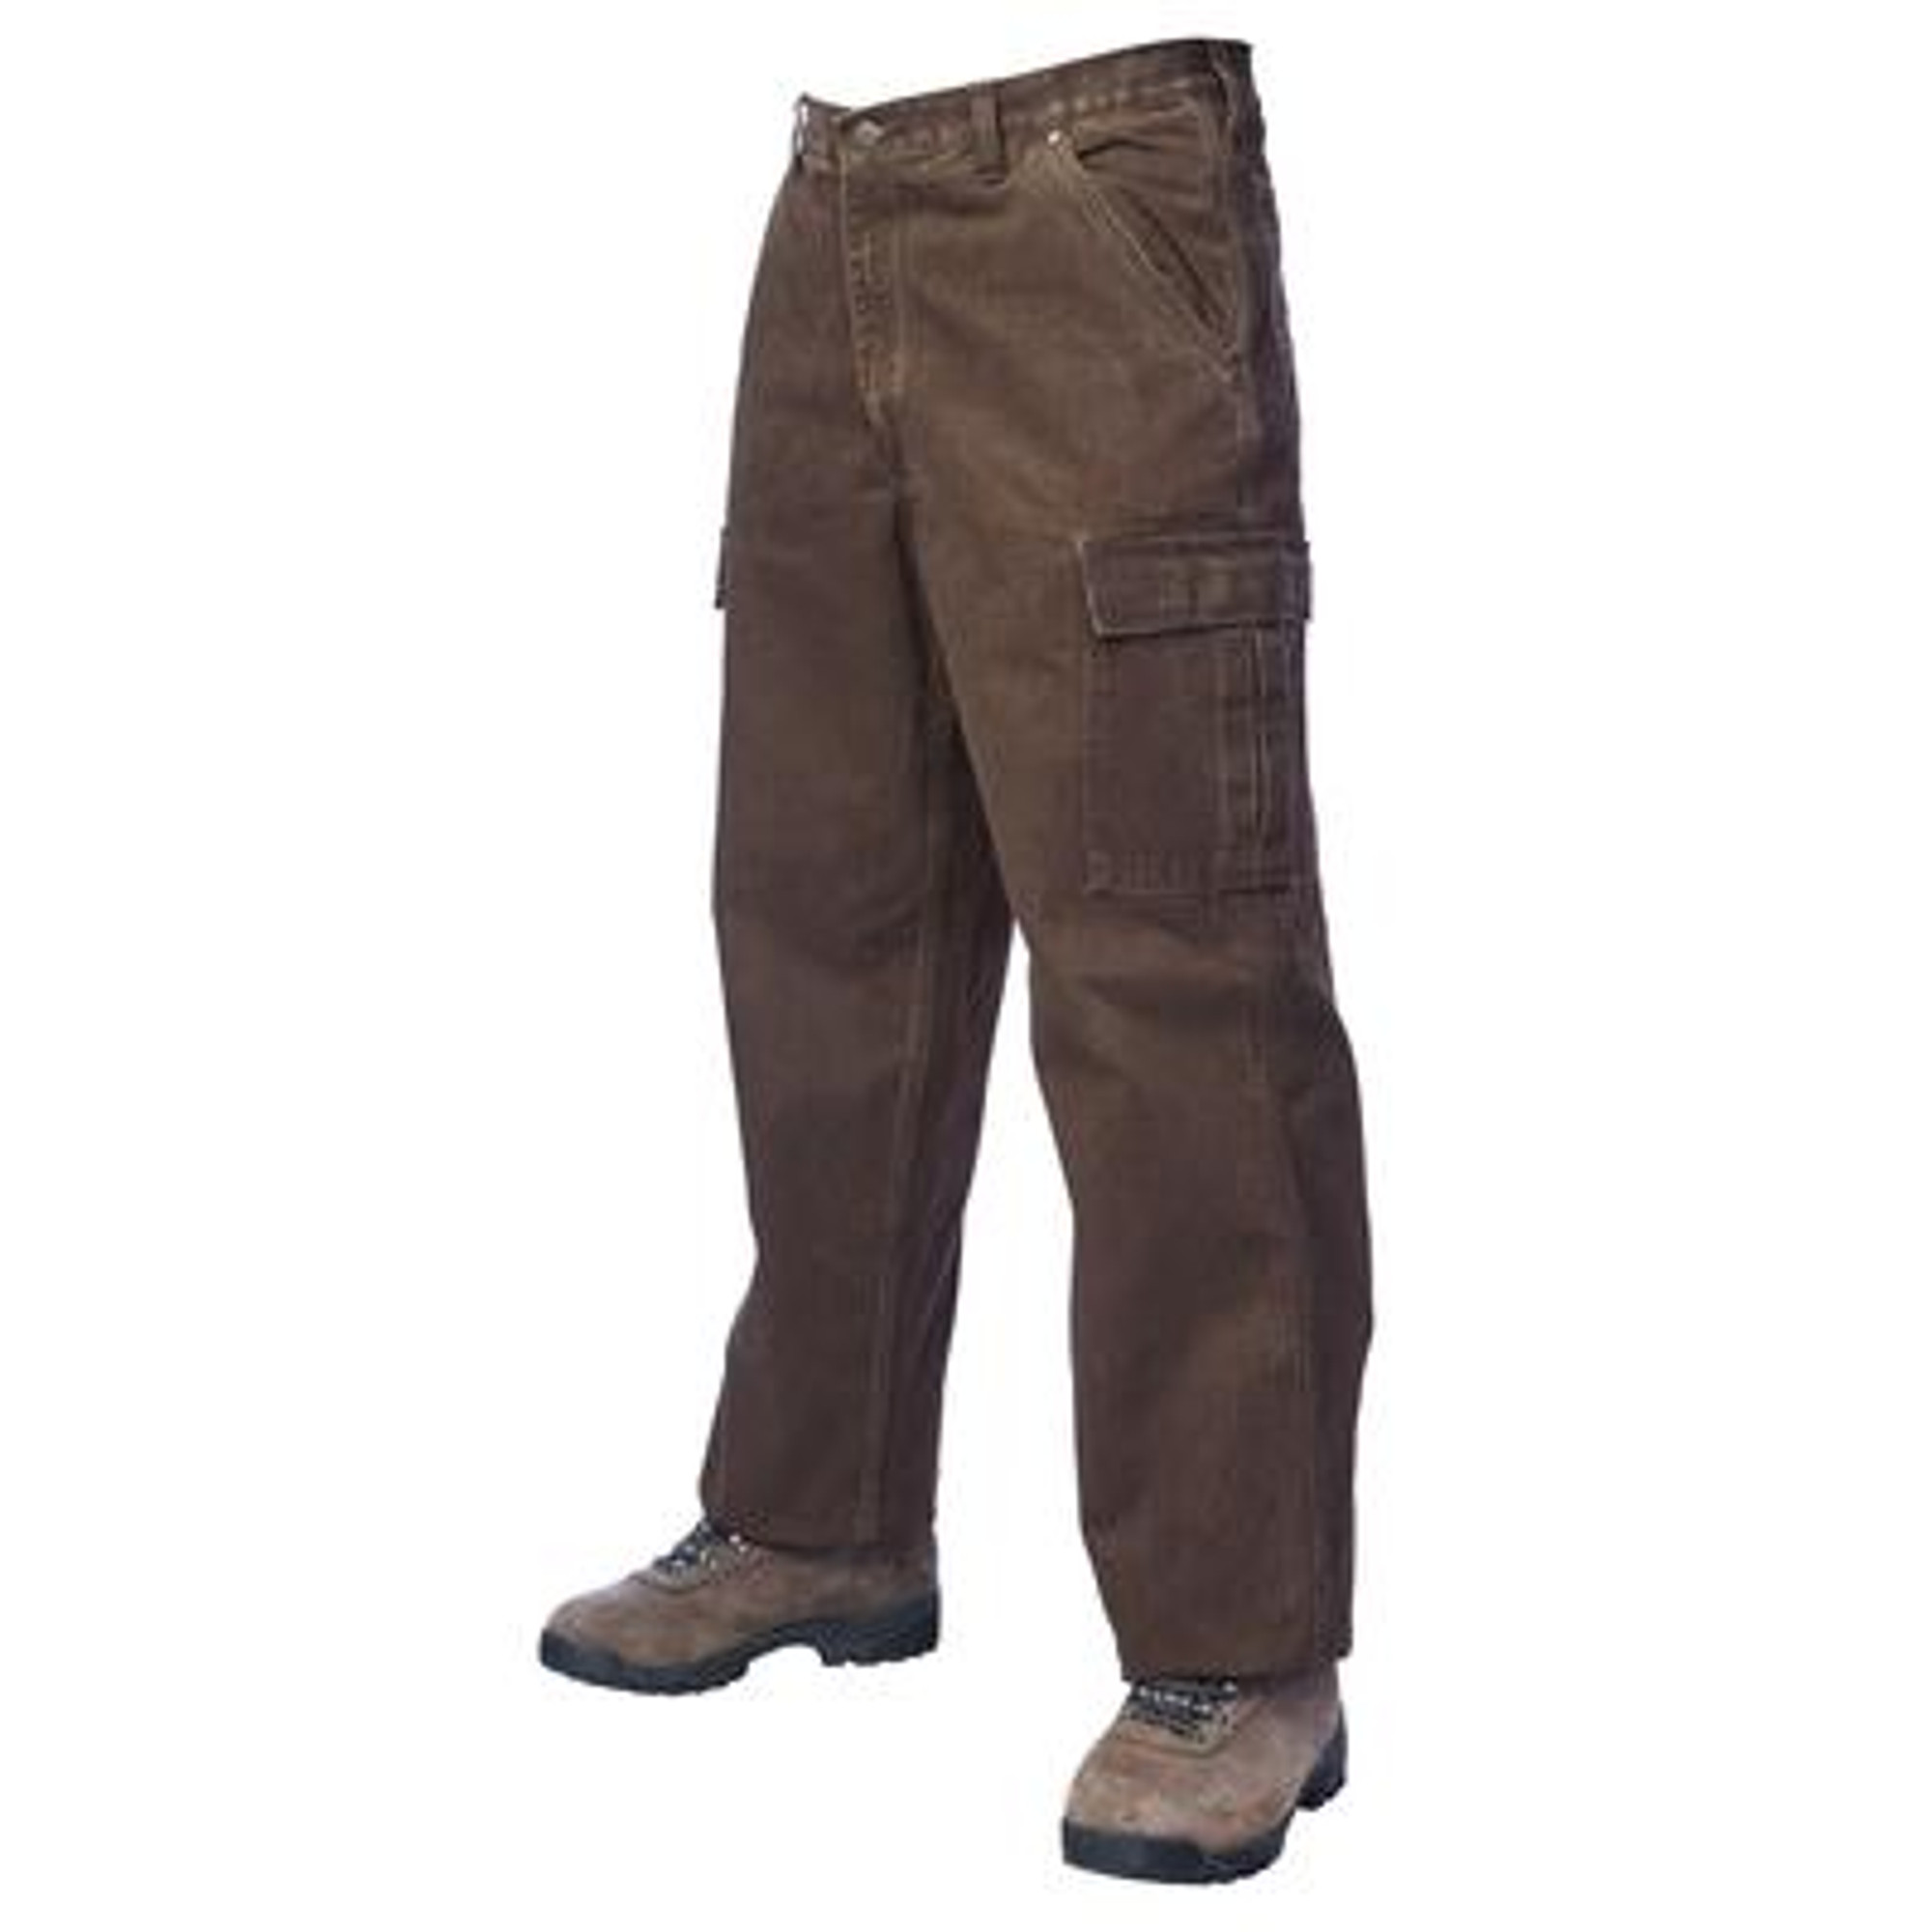 Tough Duck Washed Cargo Work Pants - Chestnut - 4 Pack